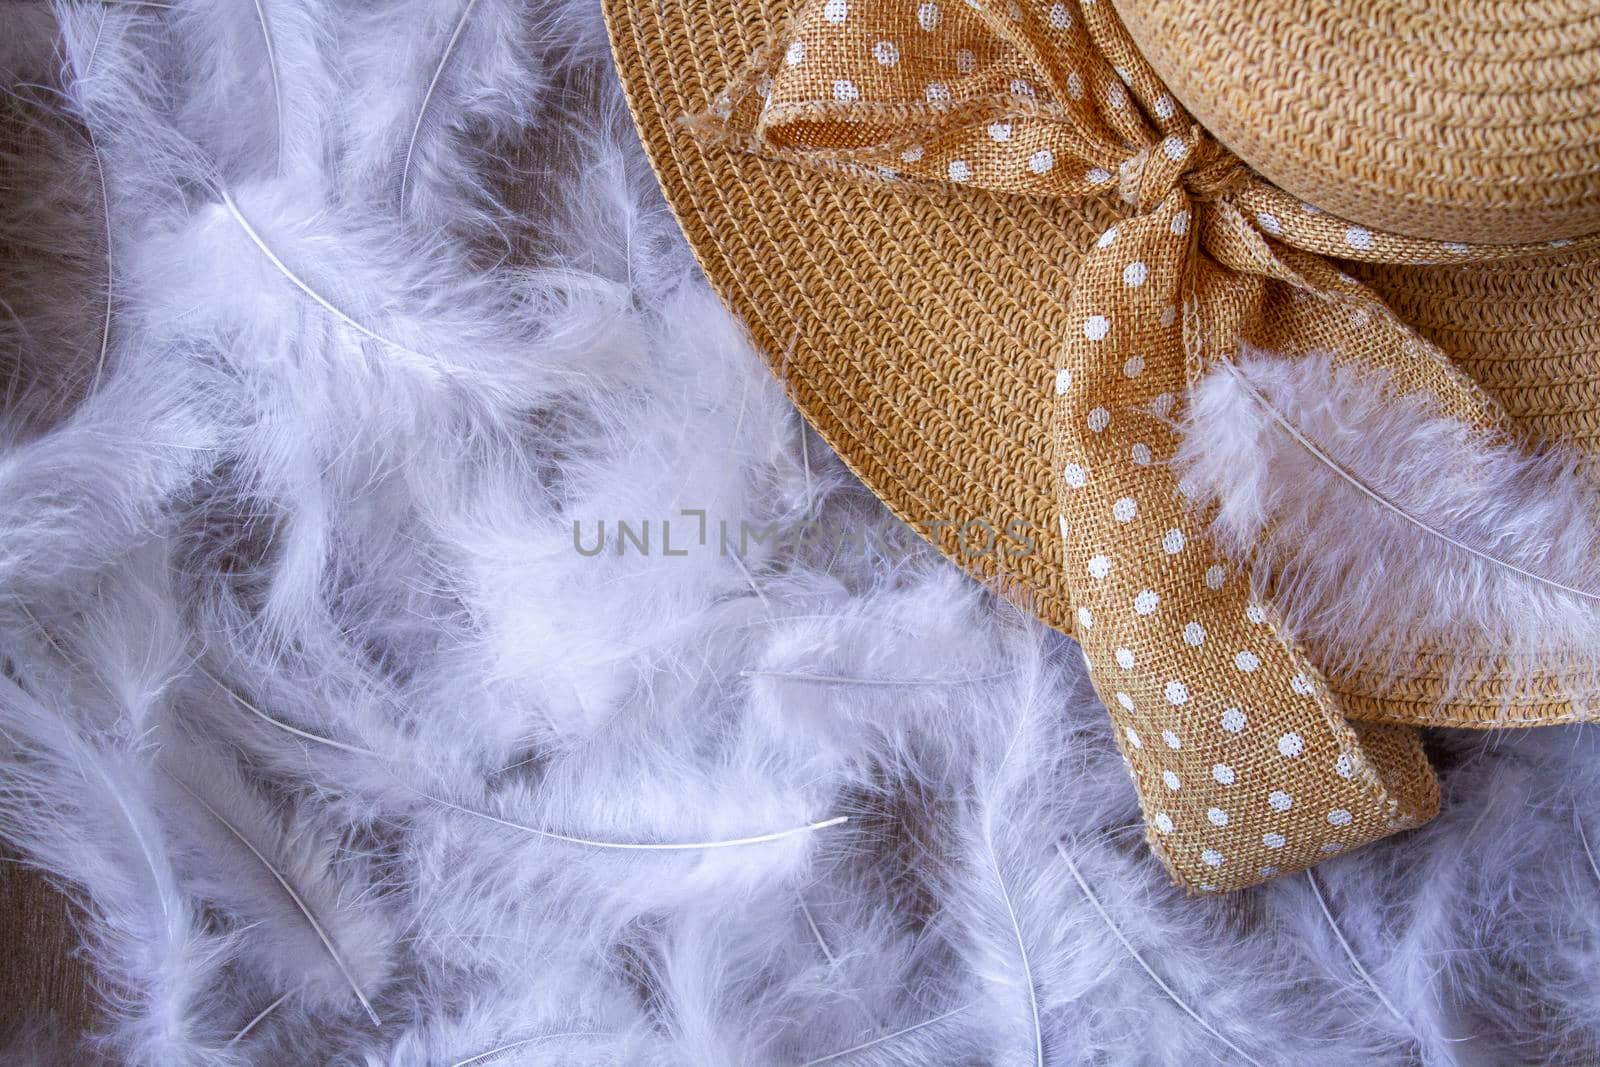 vintage women's hat on a background of white feathers top view.